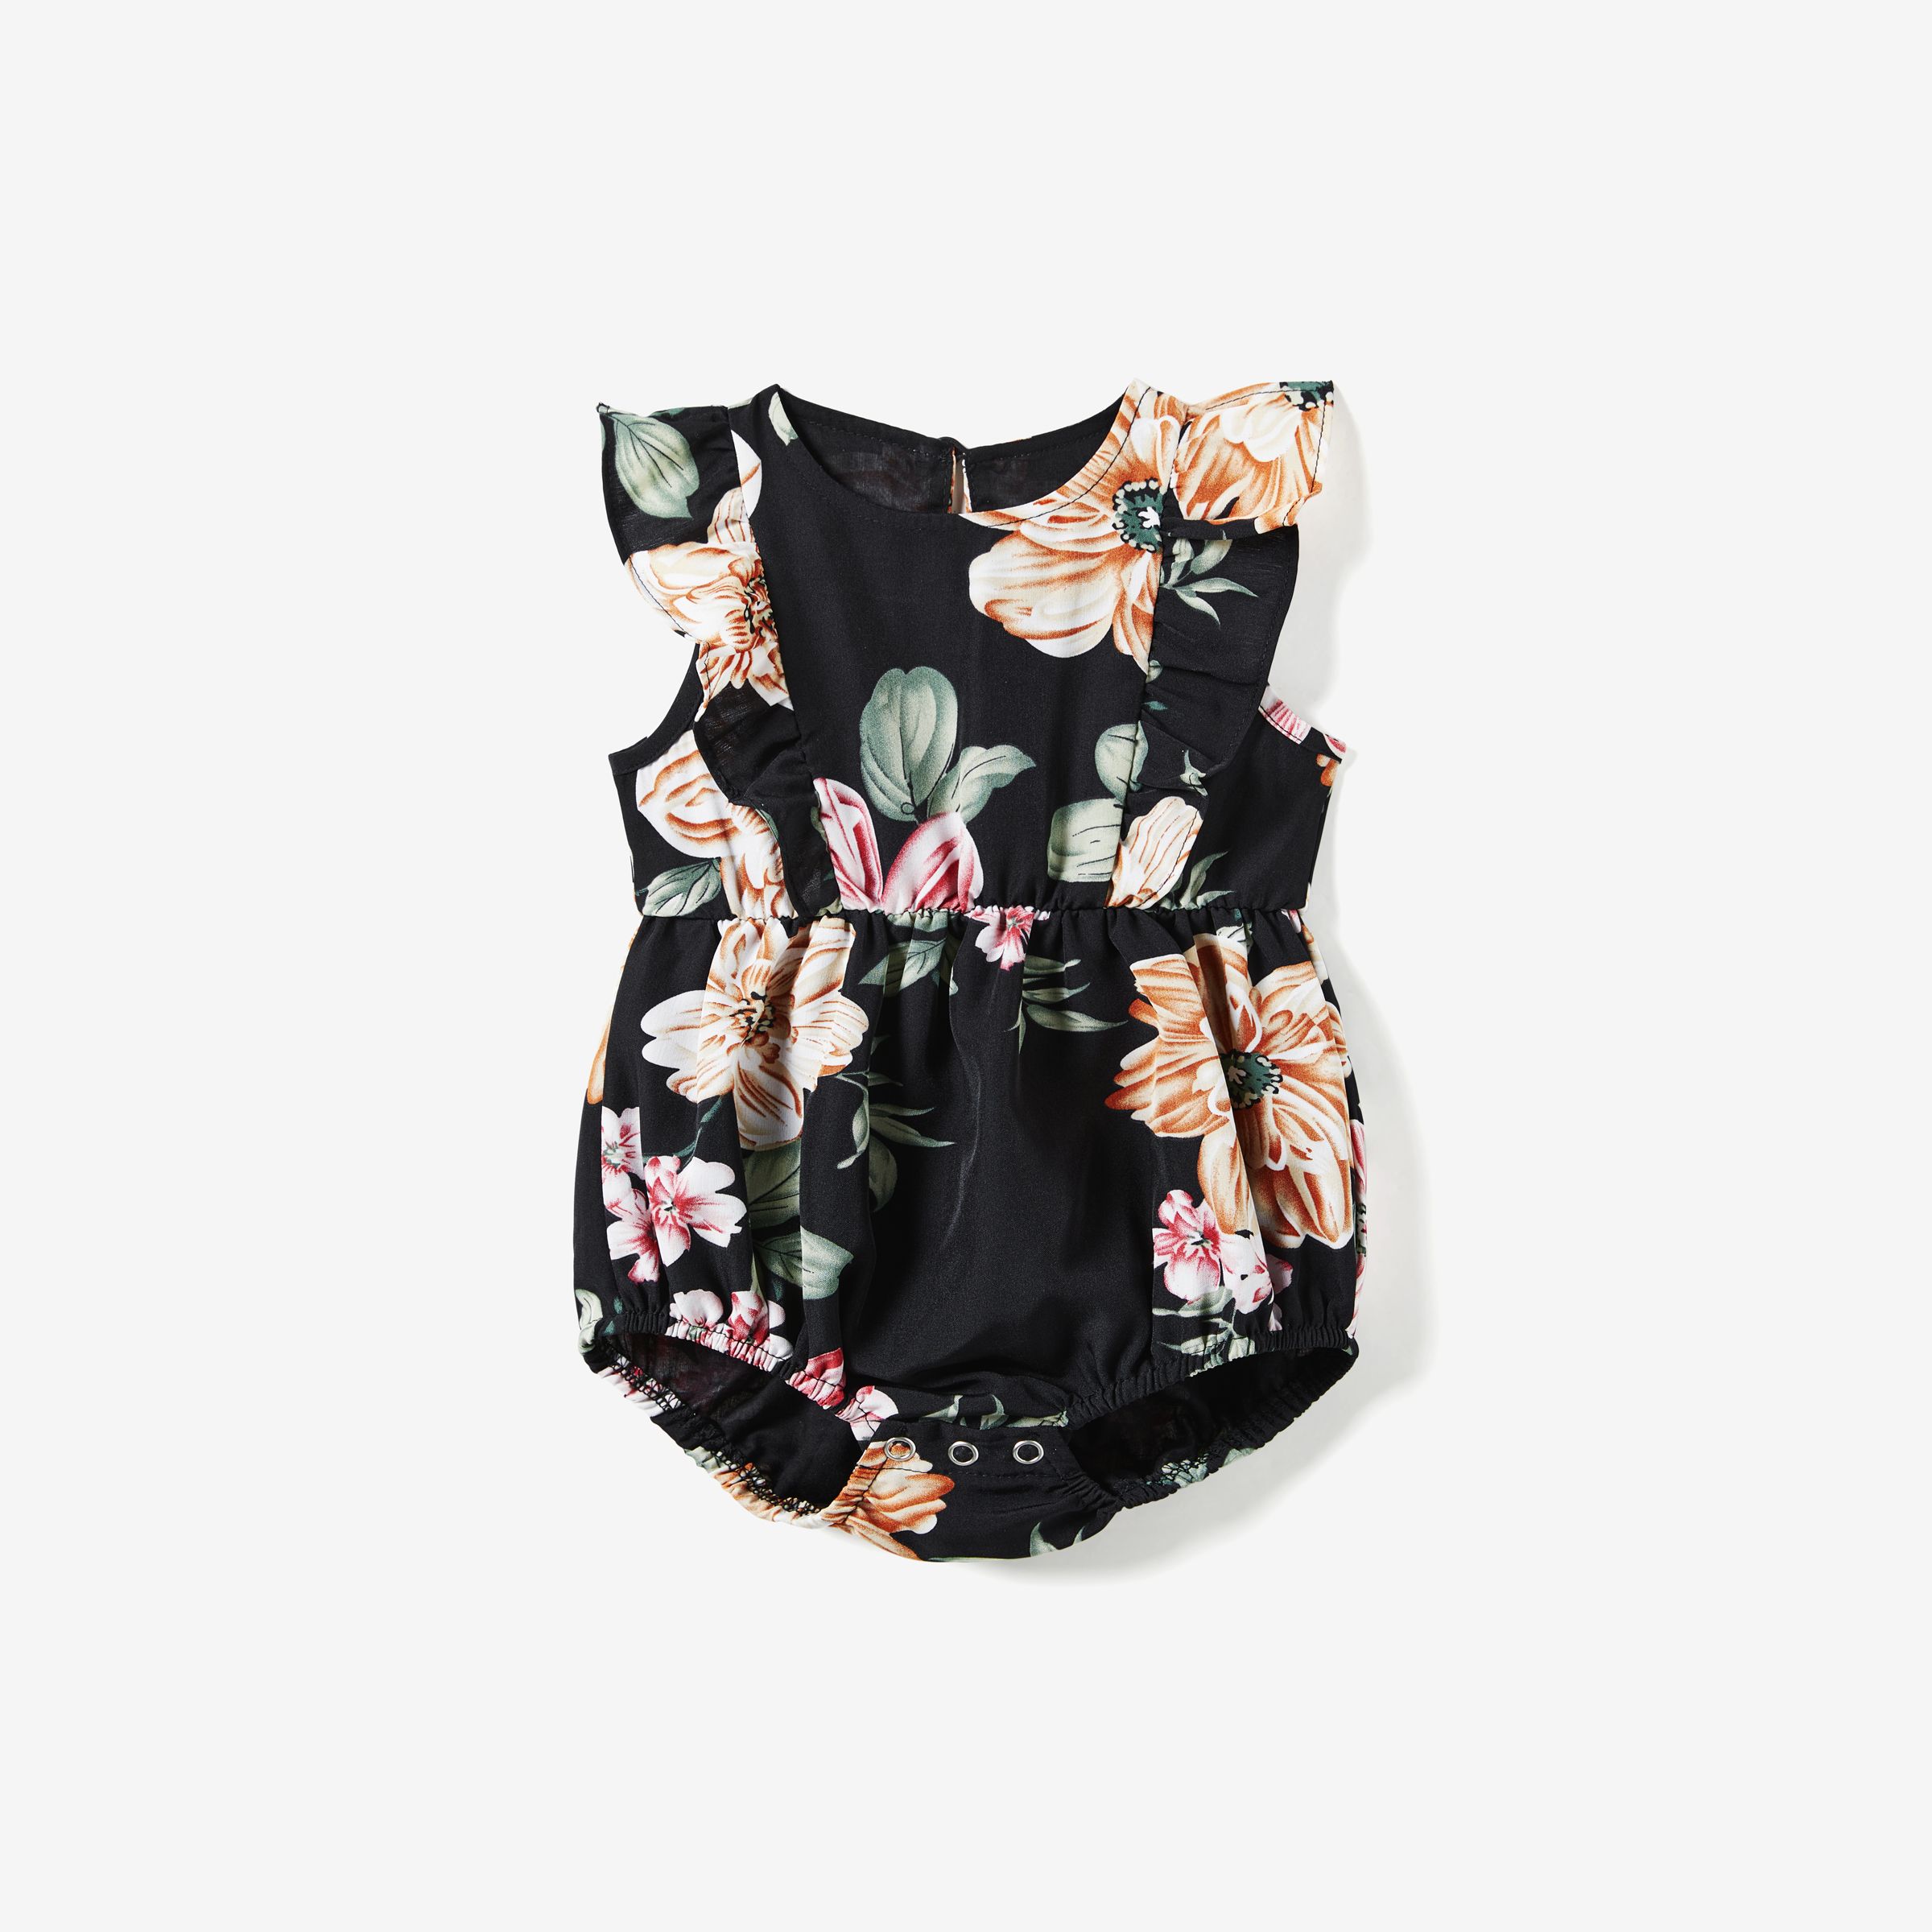 Family Matching Floral Panel T-shirt And Allover Large Floral Strap Dress Sets